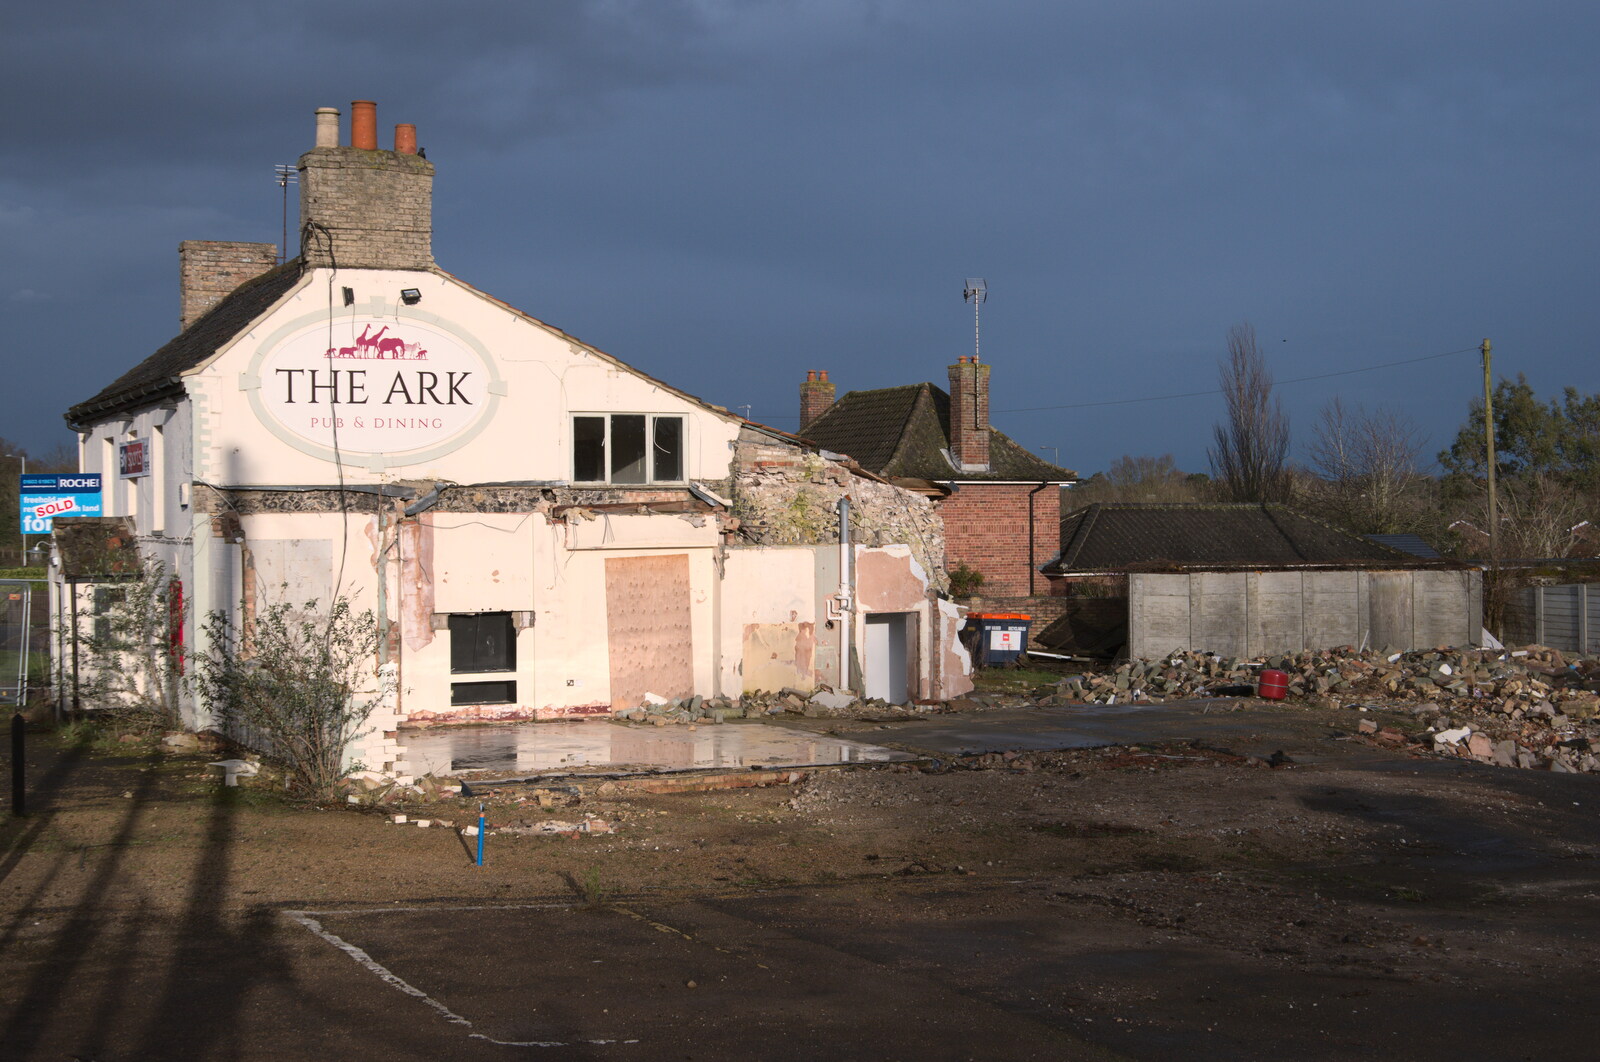 The partly-demolished Ark pub in Thetford from A Trip to High Lodge, Brandon, Suffolk - 7th March 2020